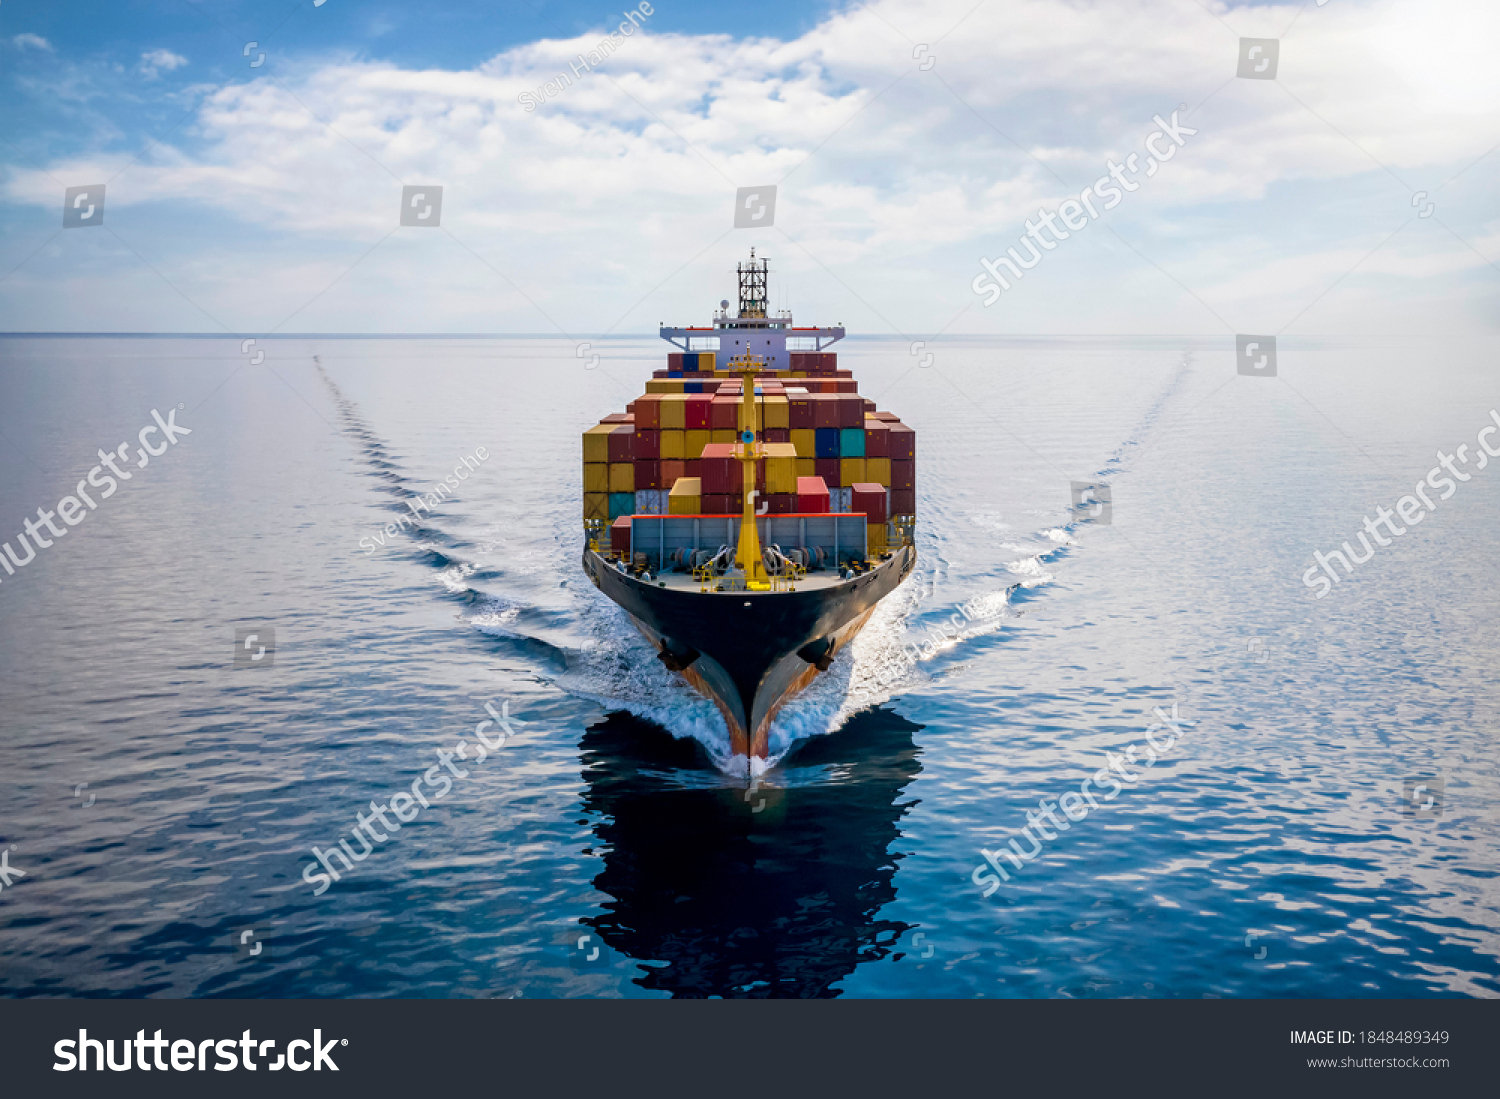 Aerial front view of a loaded container cargo vessel traveling over calm ocean #1848489349